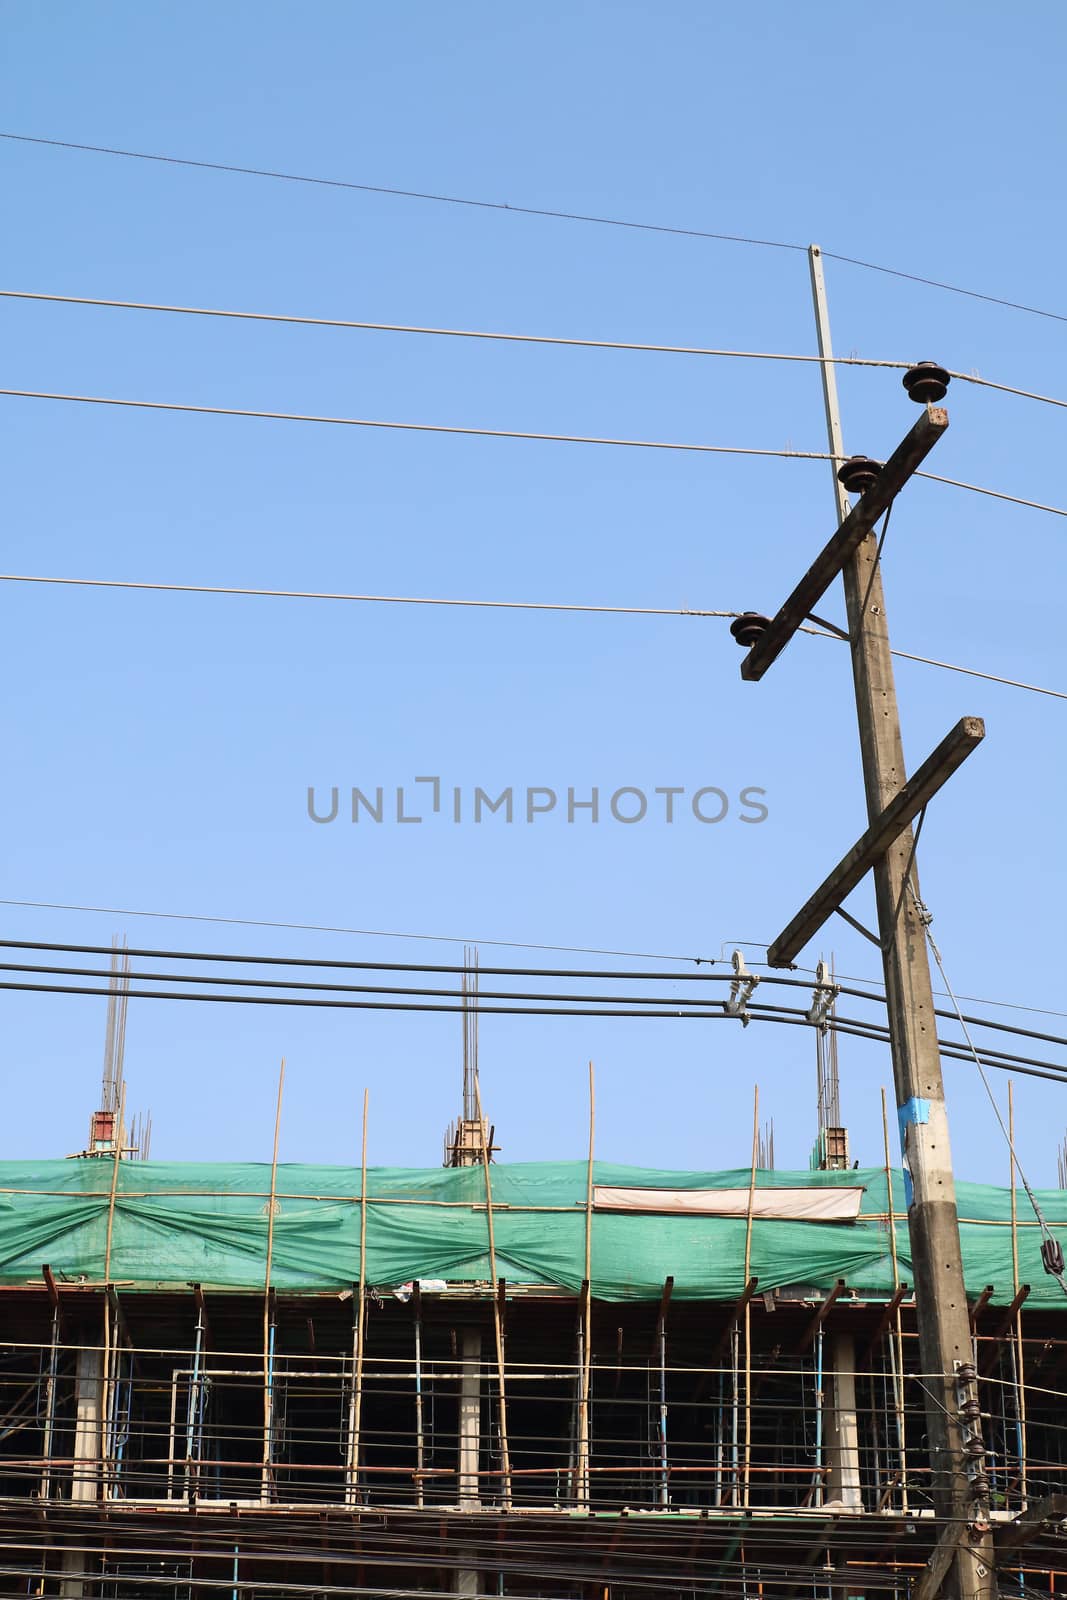 The electricity post and underconstruction building.